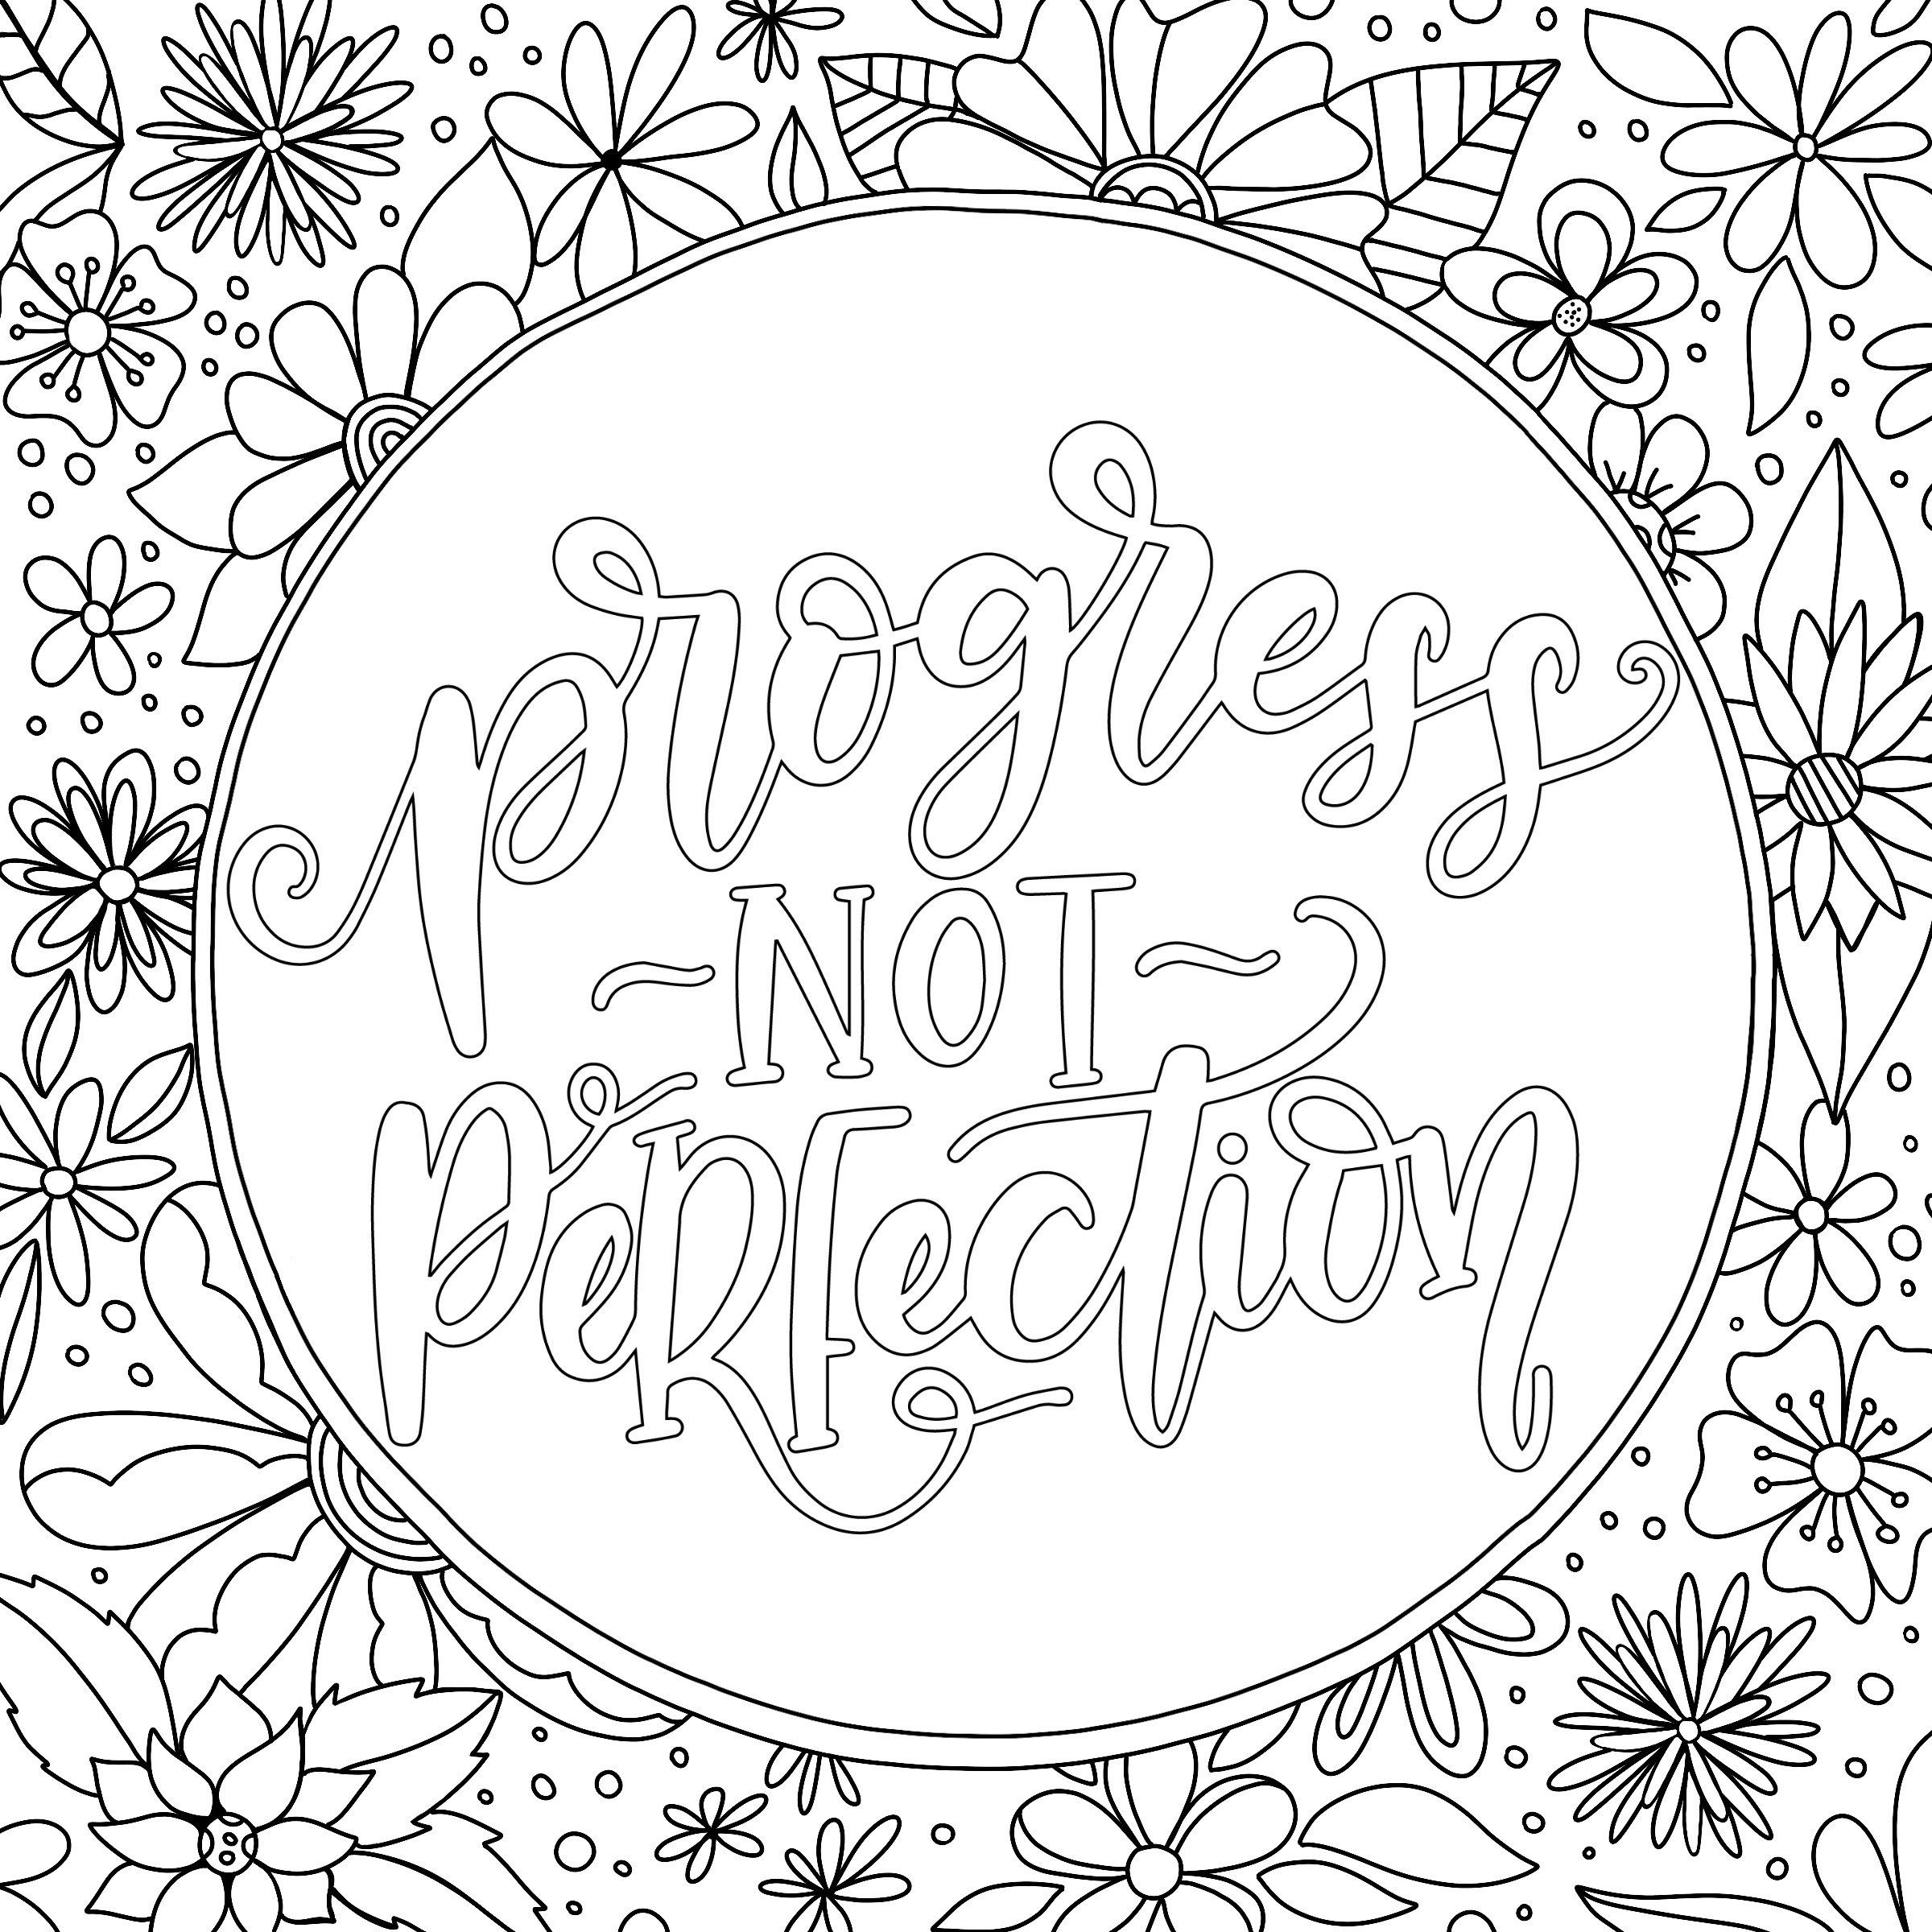 Pin On Quote Coloring Pages Pin On Drawings Free Printable Inspirational Coloring Pages Pdf